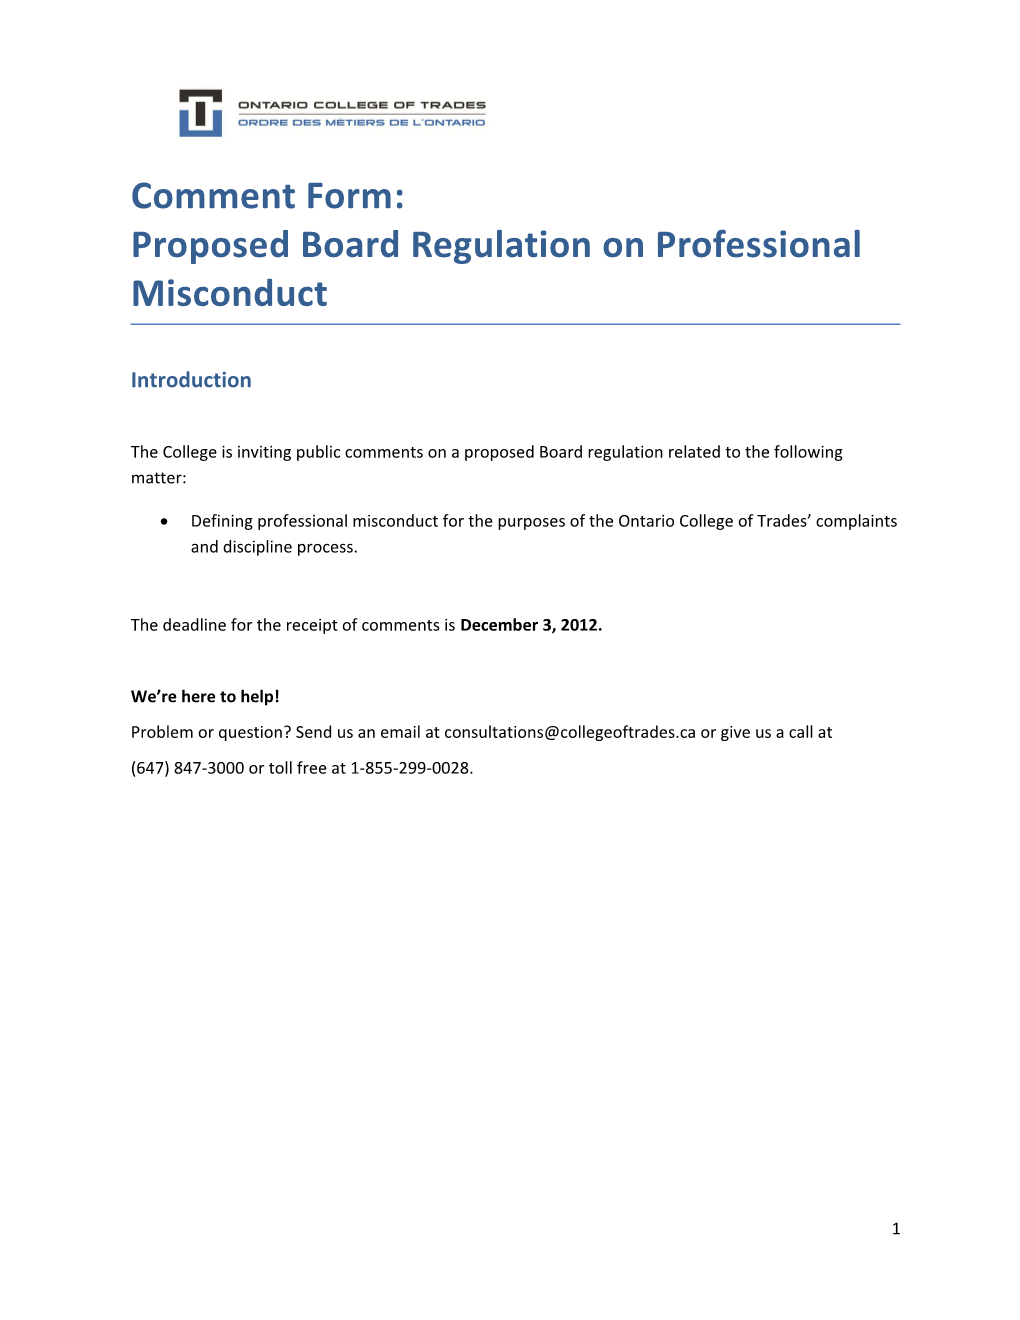 Proposed Board Regulation on Professional Misconduct